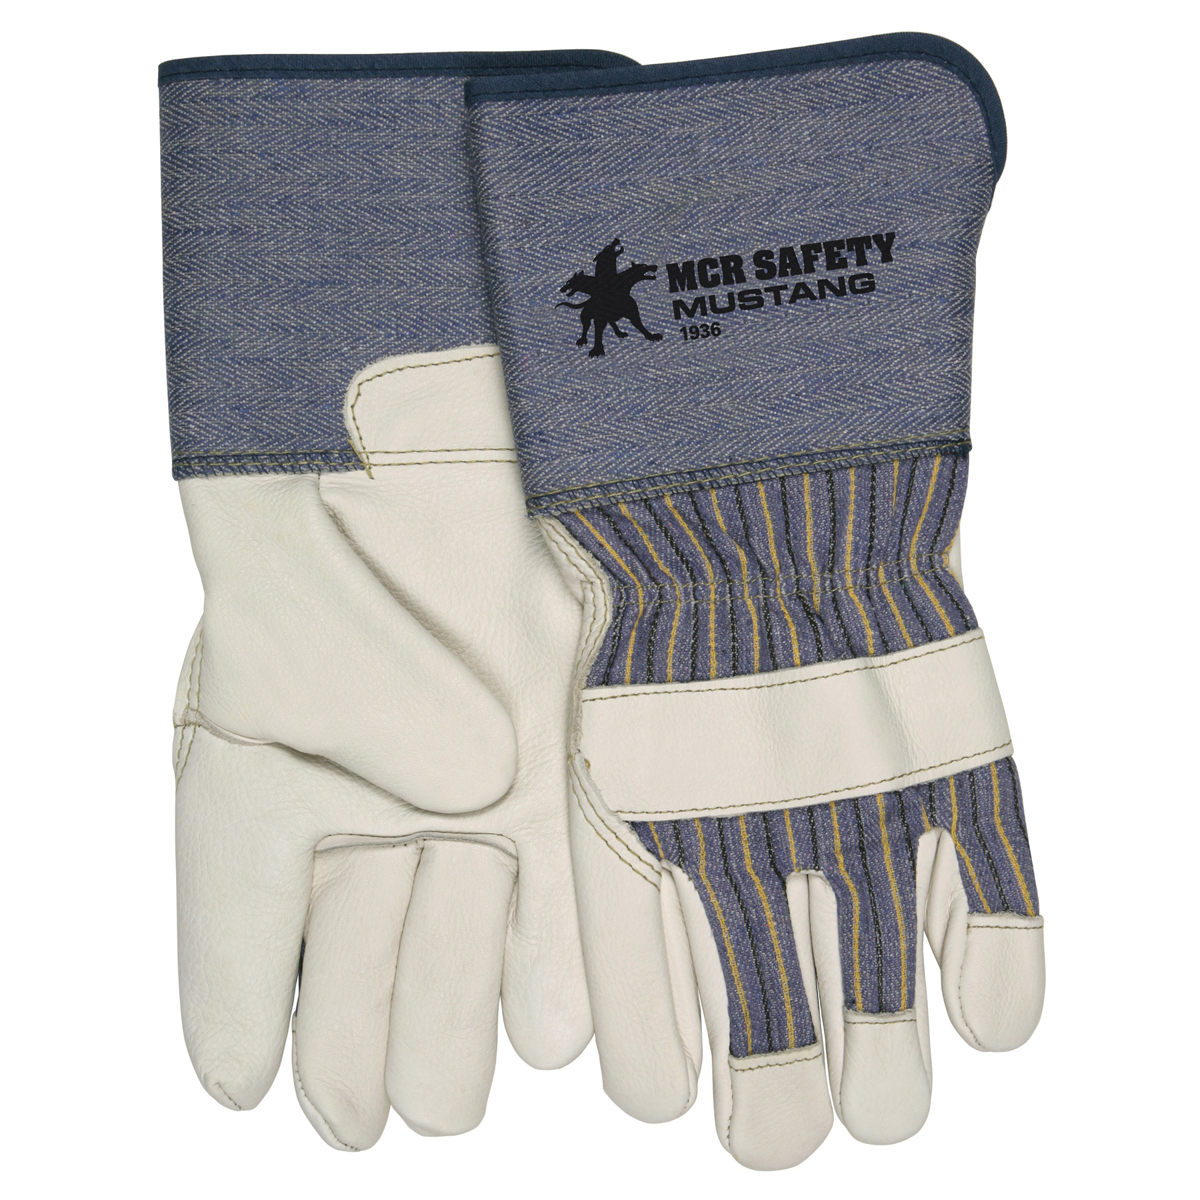 MCR Safety Medium Blue, Yellow And Black Premium Grain Cowhide Palm Gloves With Fabric Back And Rubberized Gauntlet Cuff